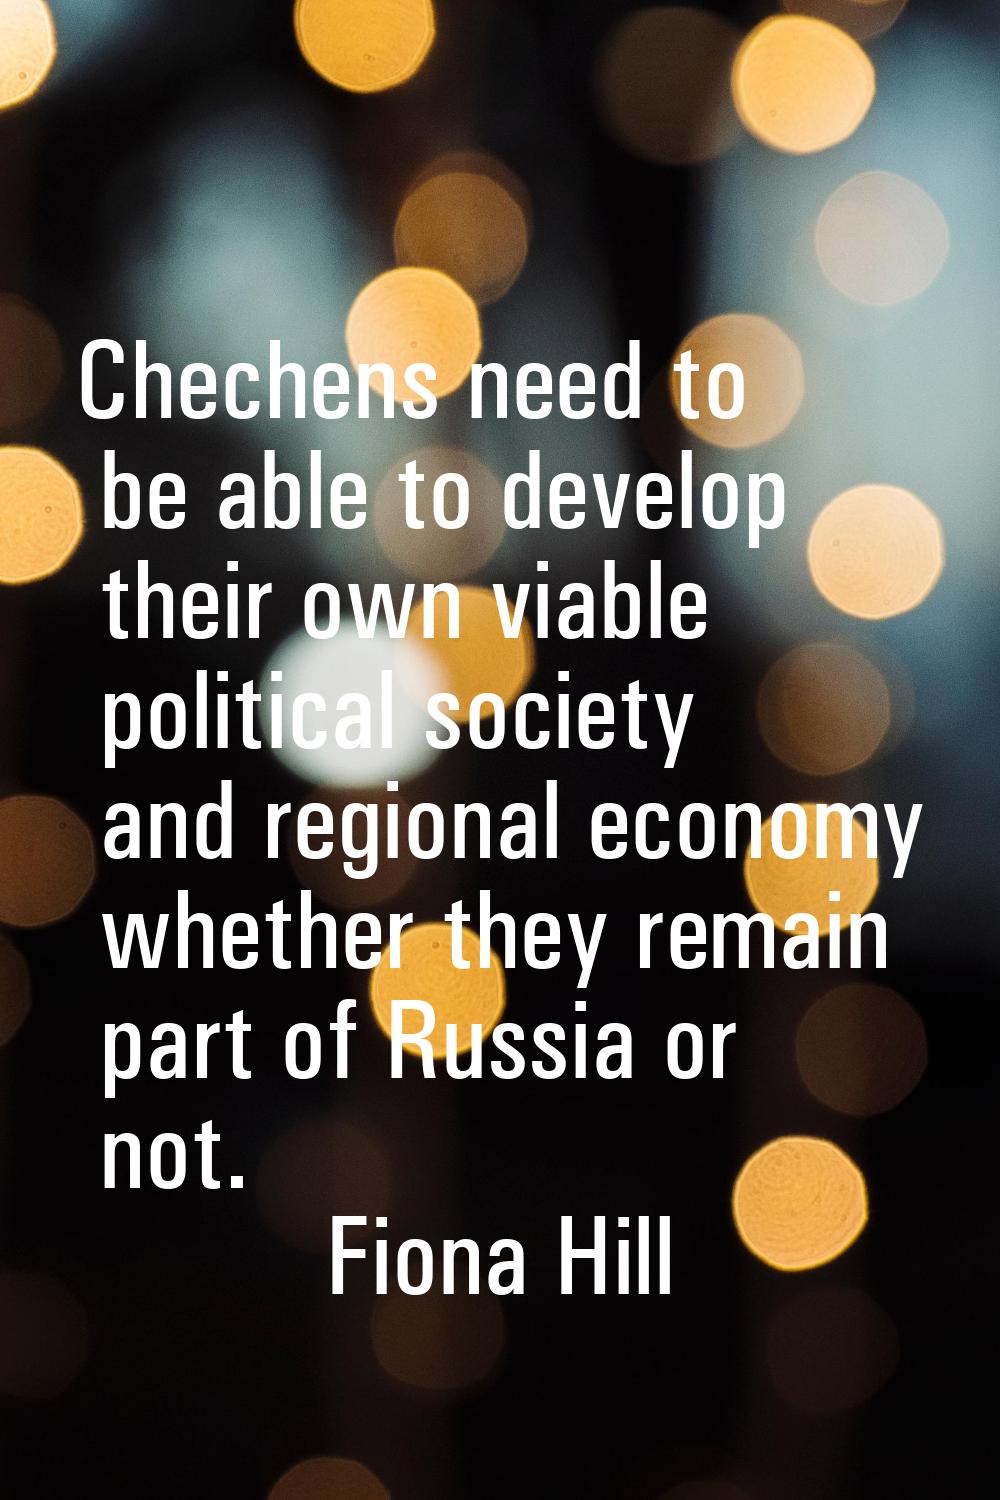 Chechens need to be able to develop their own viable political society and regional economy whether